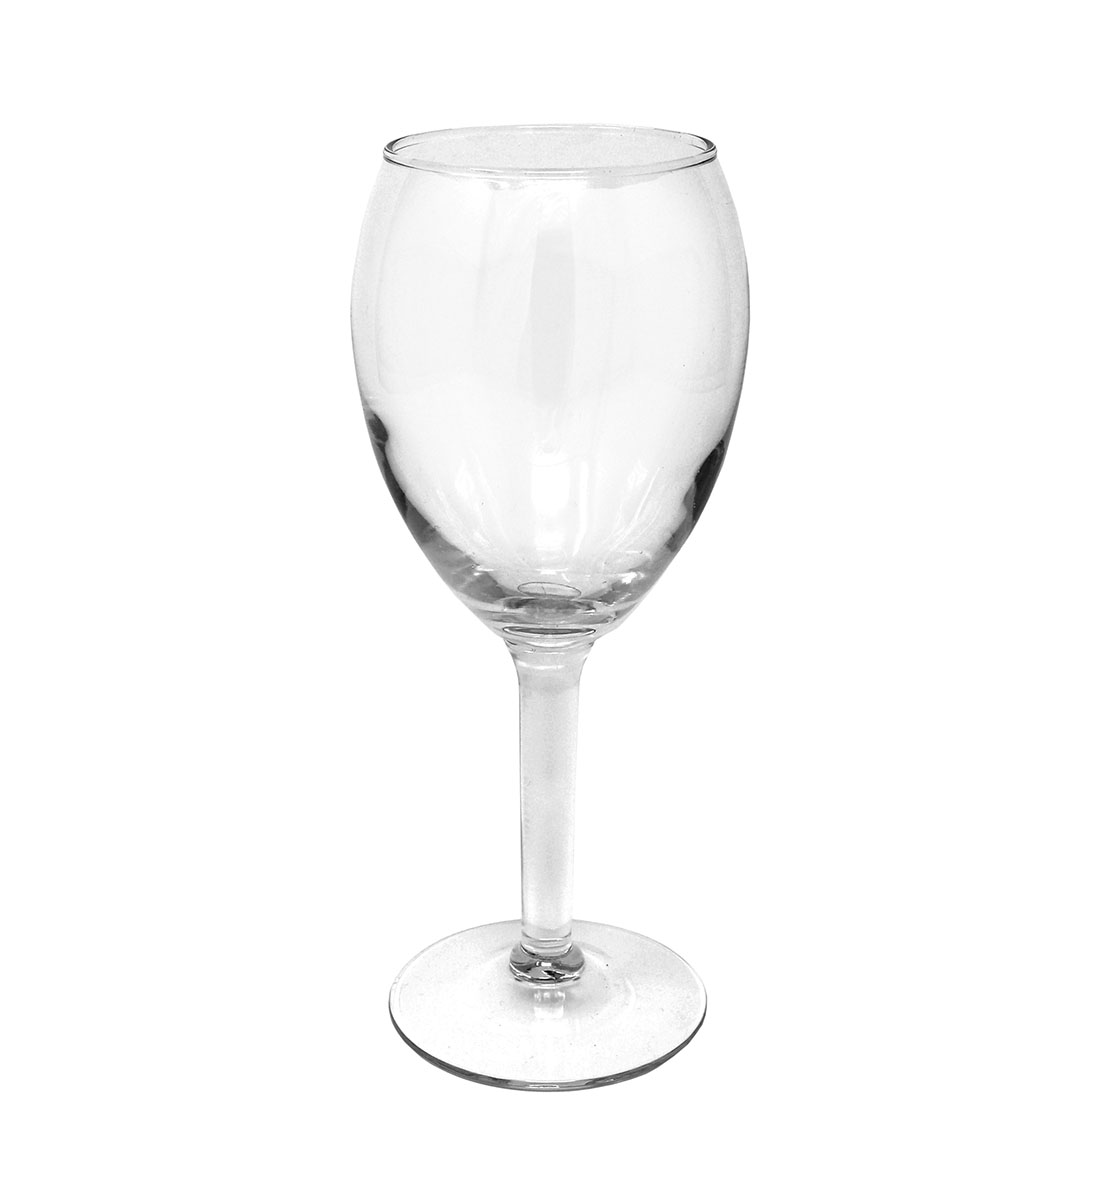 BENETI Stemless Wine Glasses [Set of 4] 17 Ounce, German Made Sturdy Drinking  Glasses for Alcohol Beverages, Wine Goblets, Wine Tumblers - Oklahoma  Farmhouse Decor